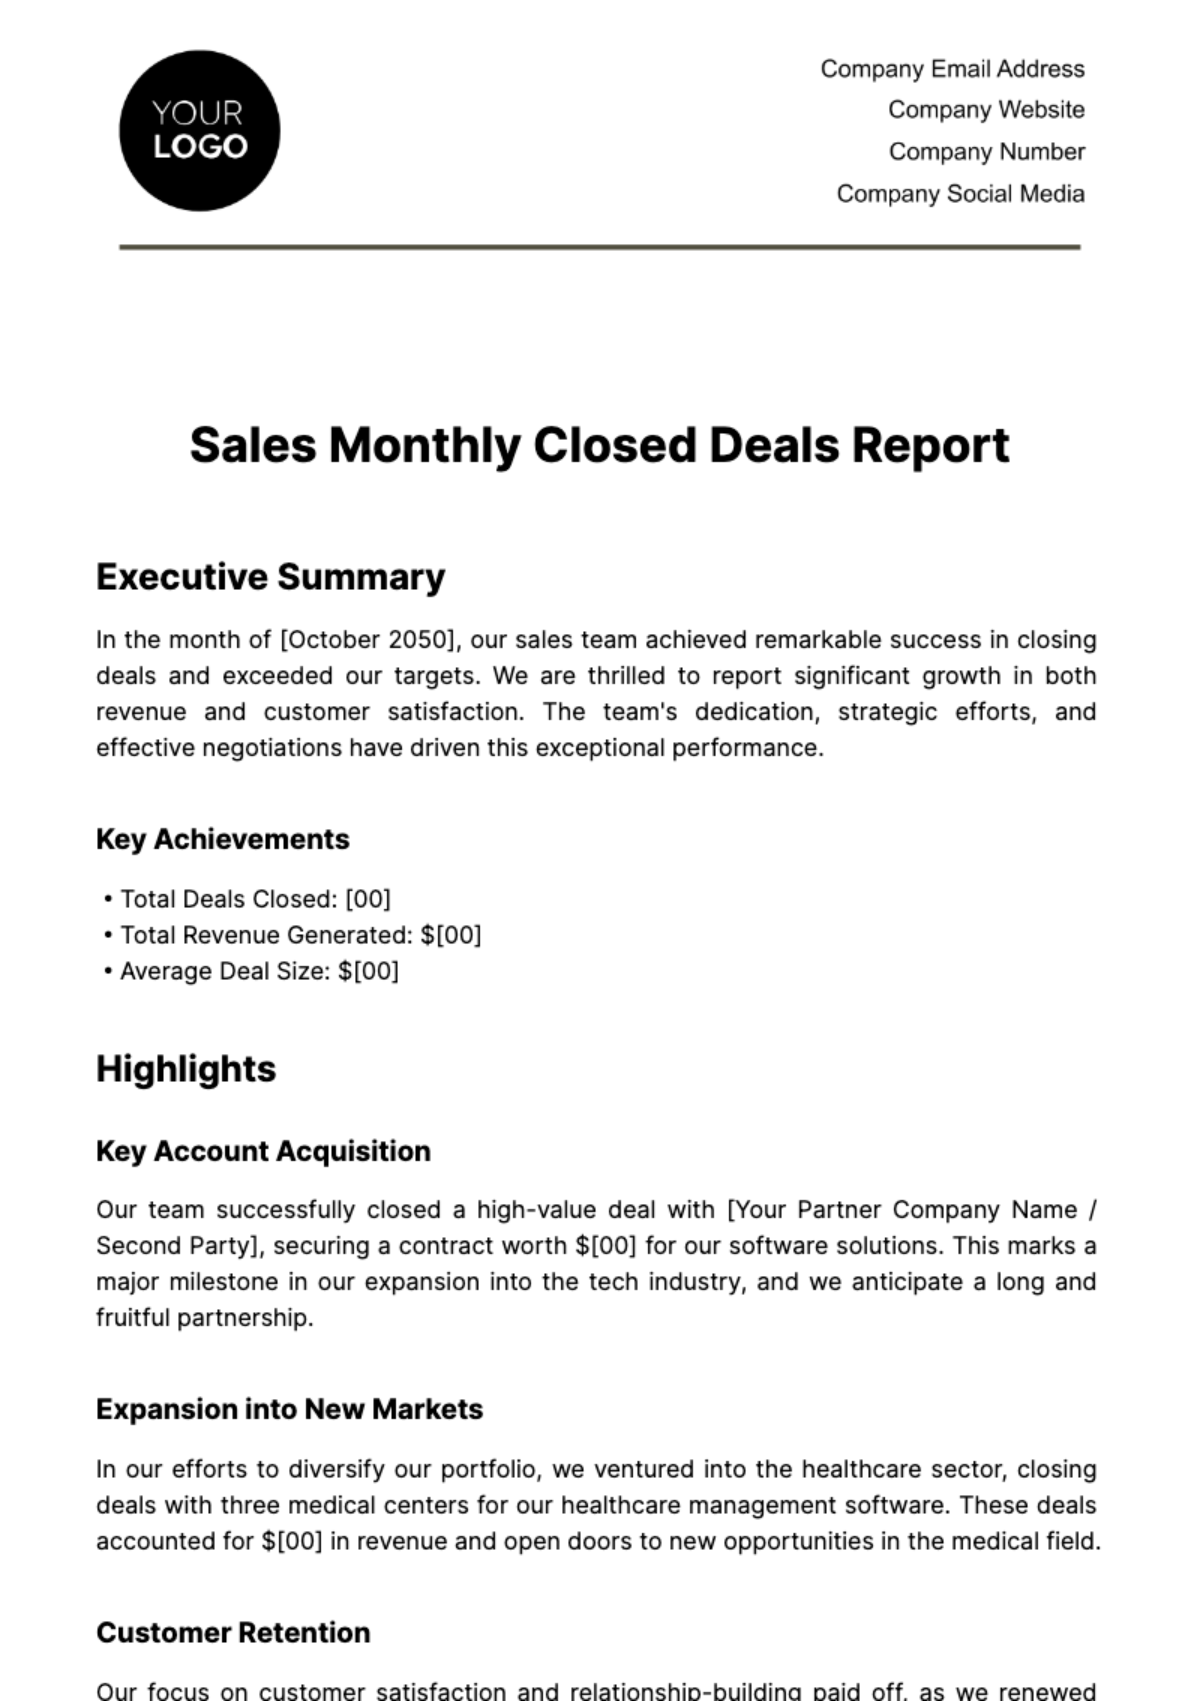 Sales Monthly Closed Deals Report Template